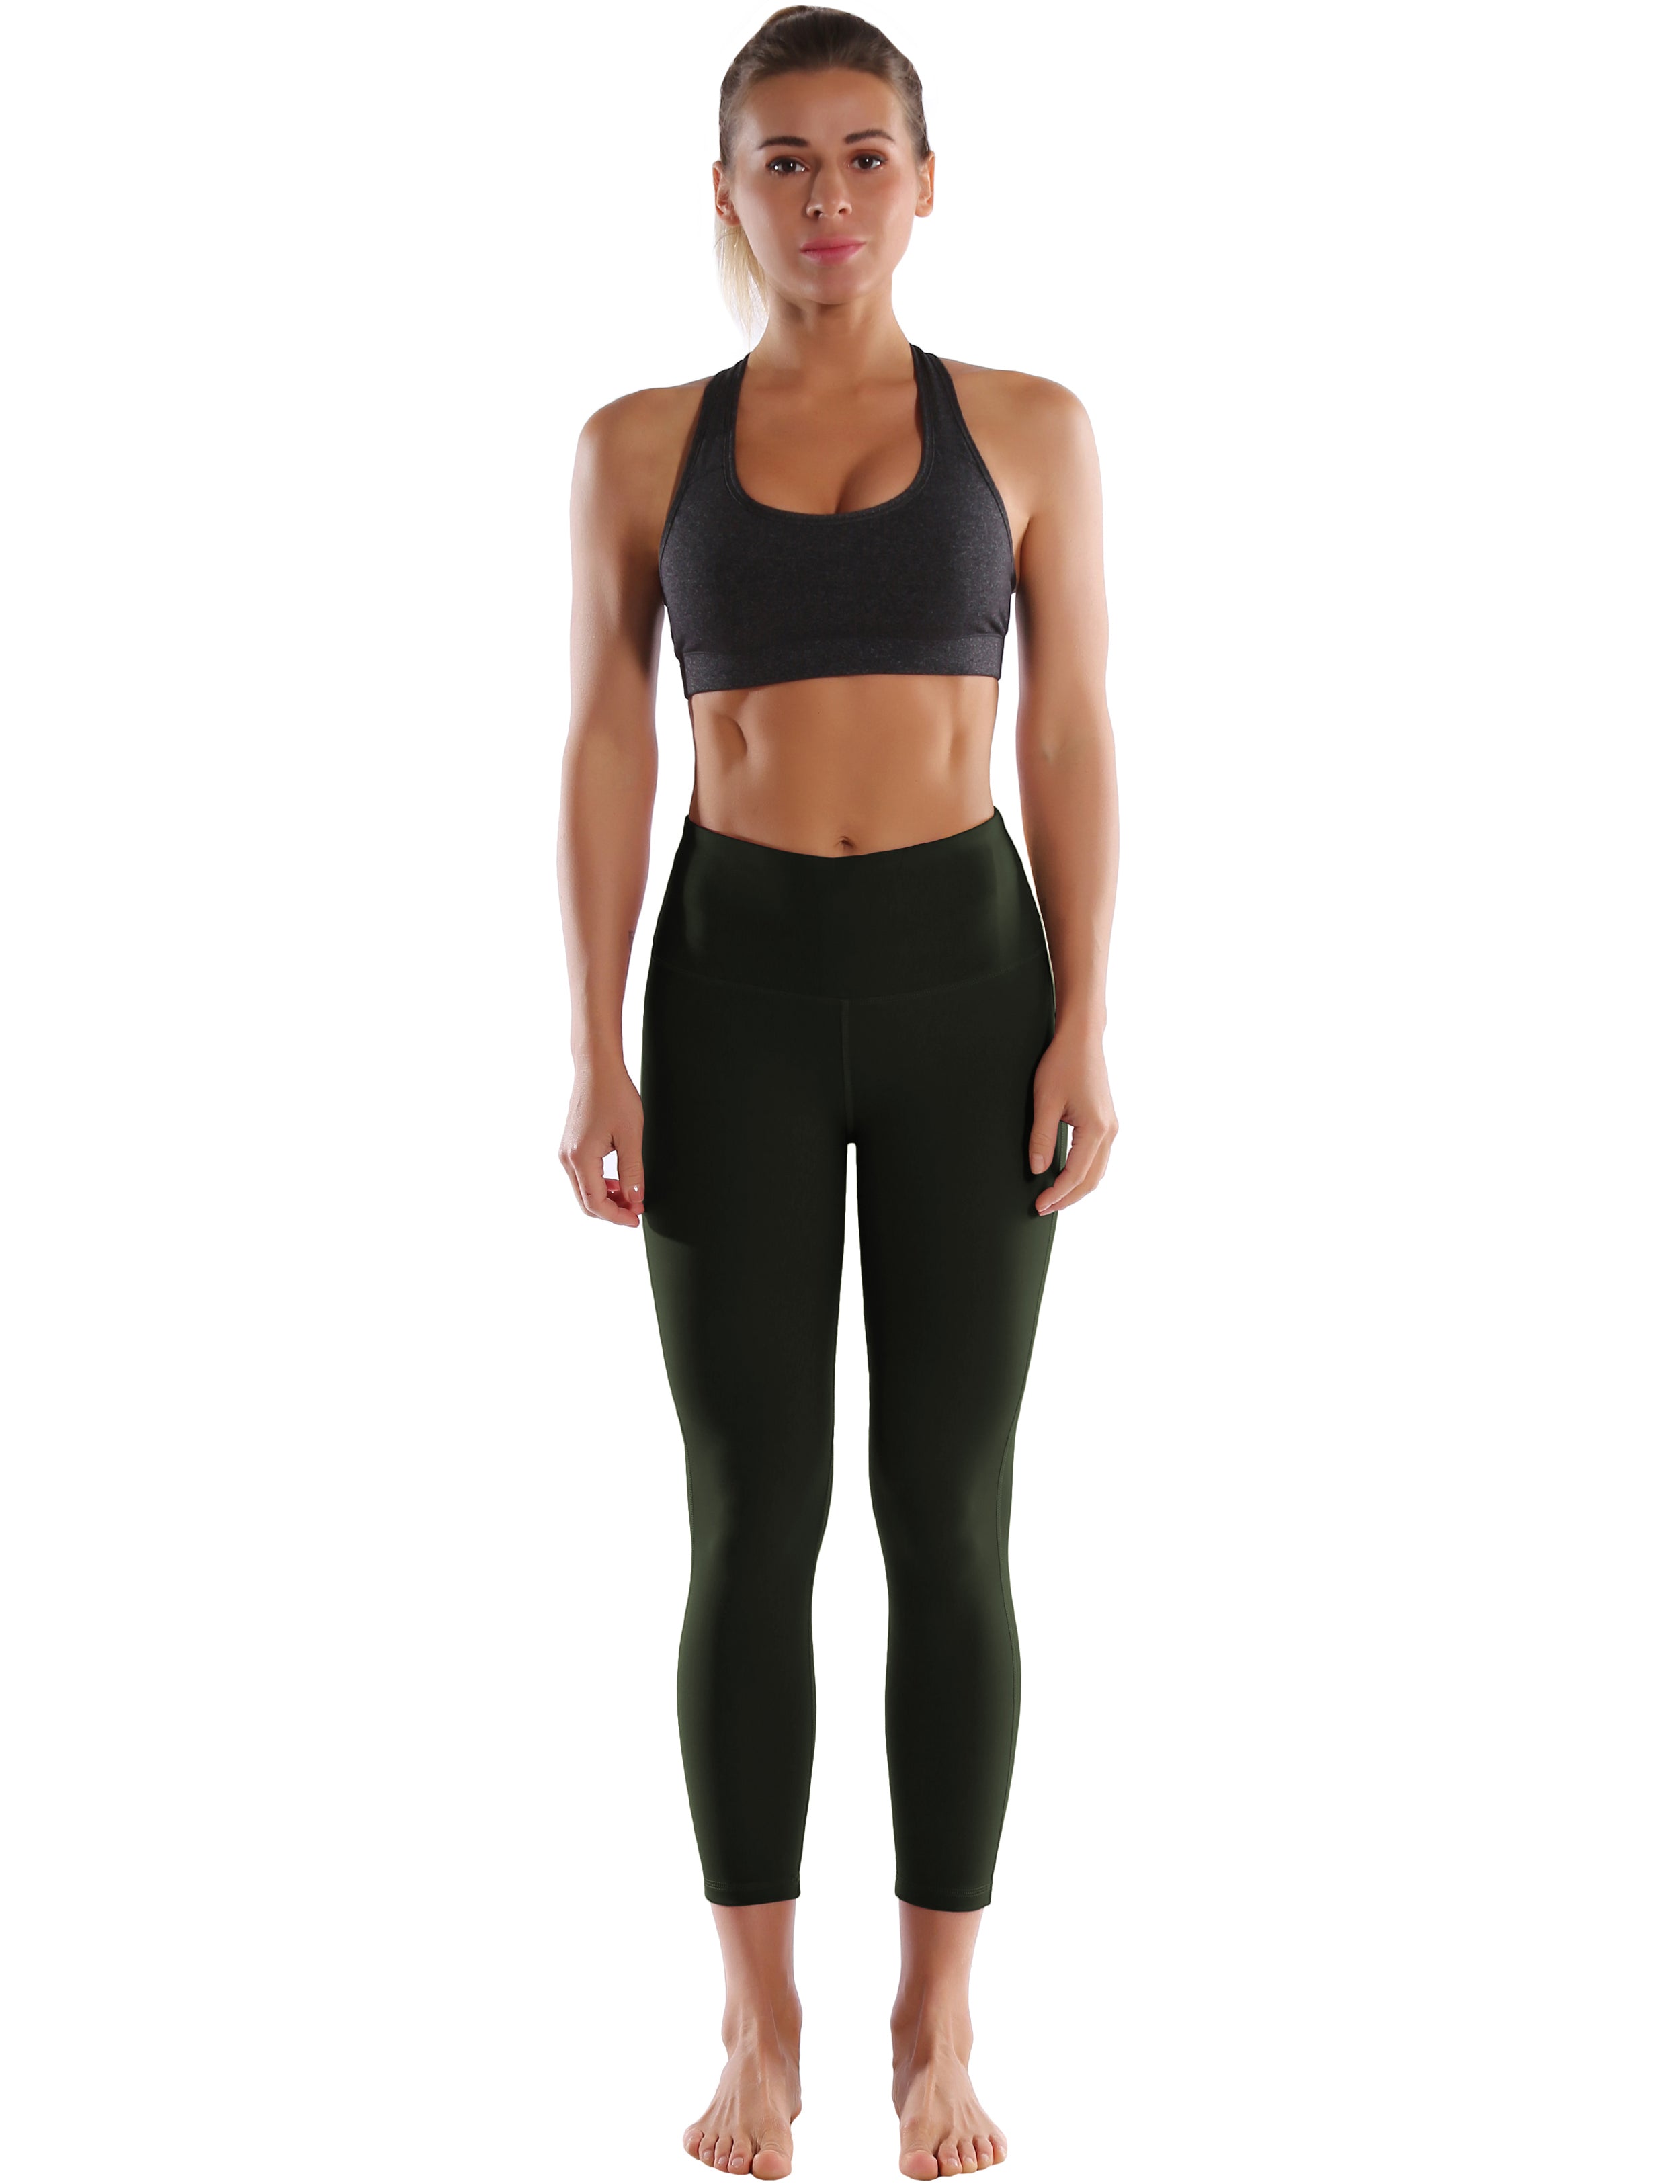 22" High Waist Side Line Capris olivegray 75%Nylon/25%Spandex Fabric doesn't attract lint easily 4-way stretch No see-through Moisture-wicking Tummy control Inner pocket